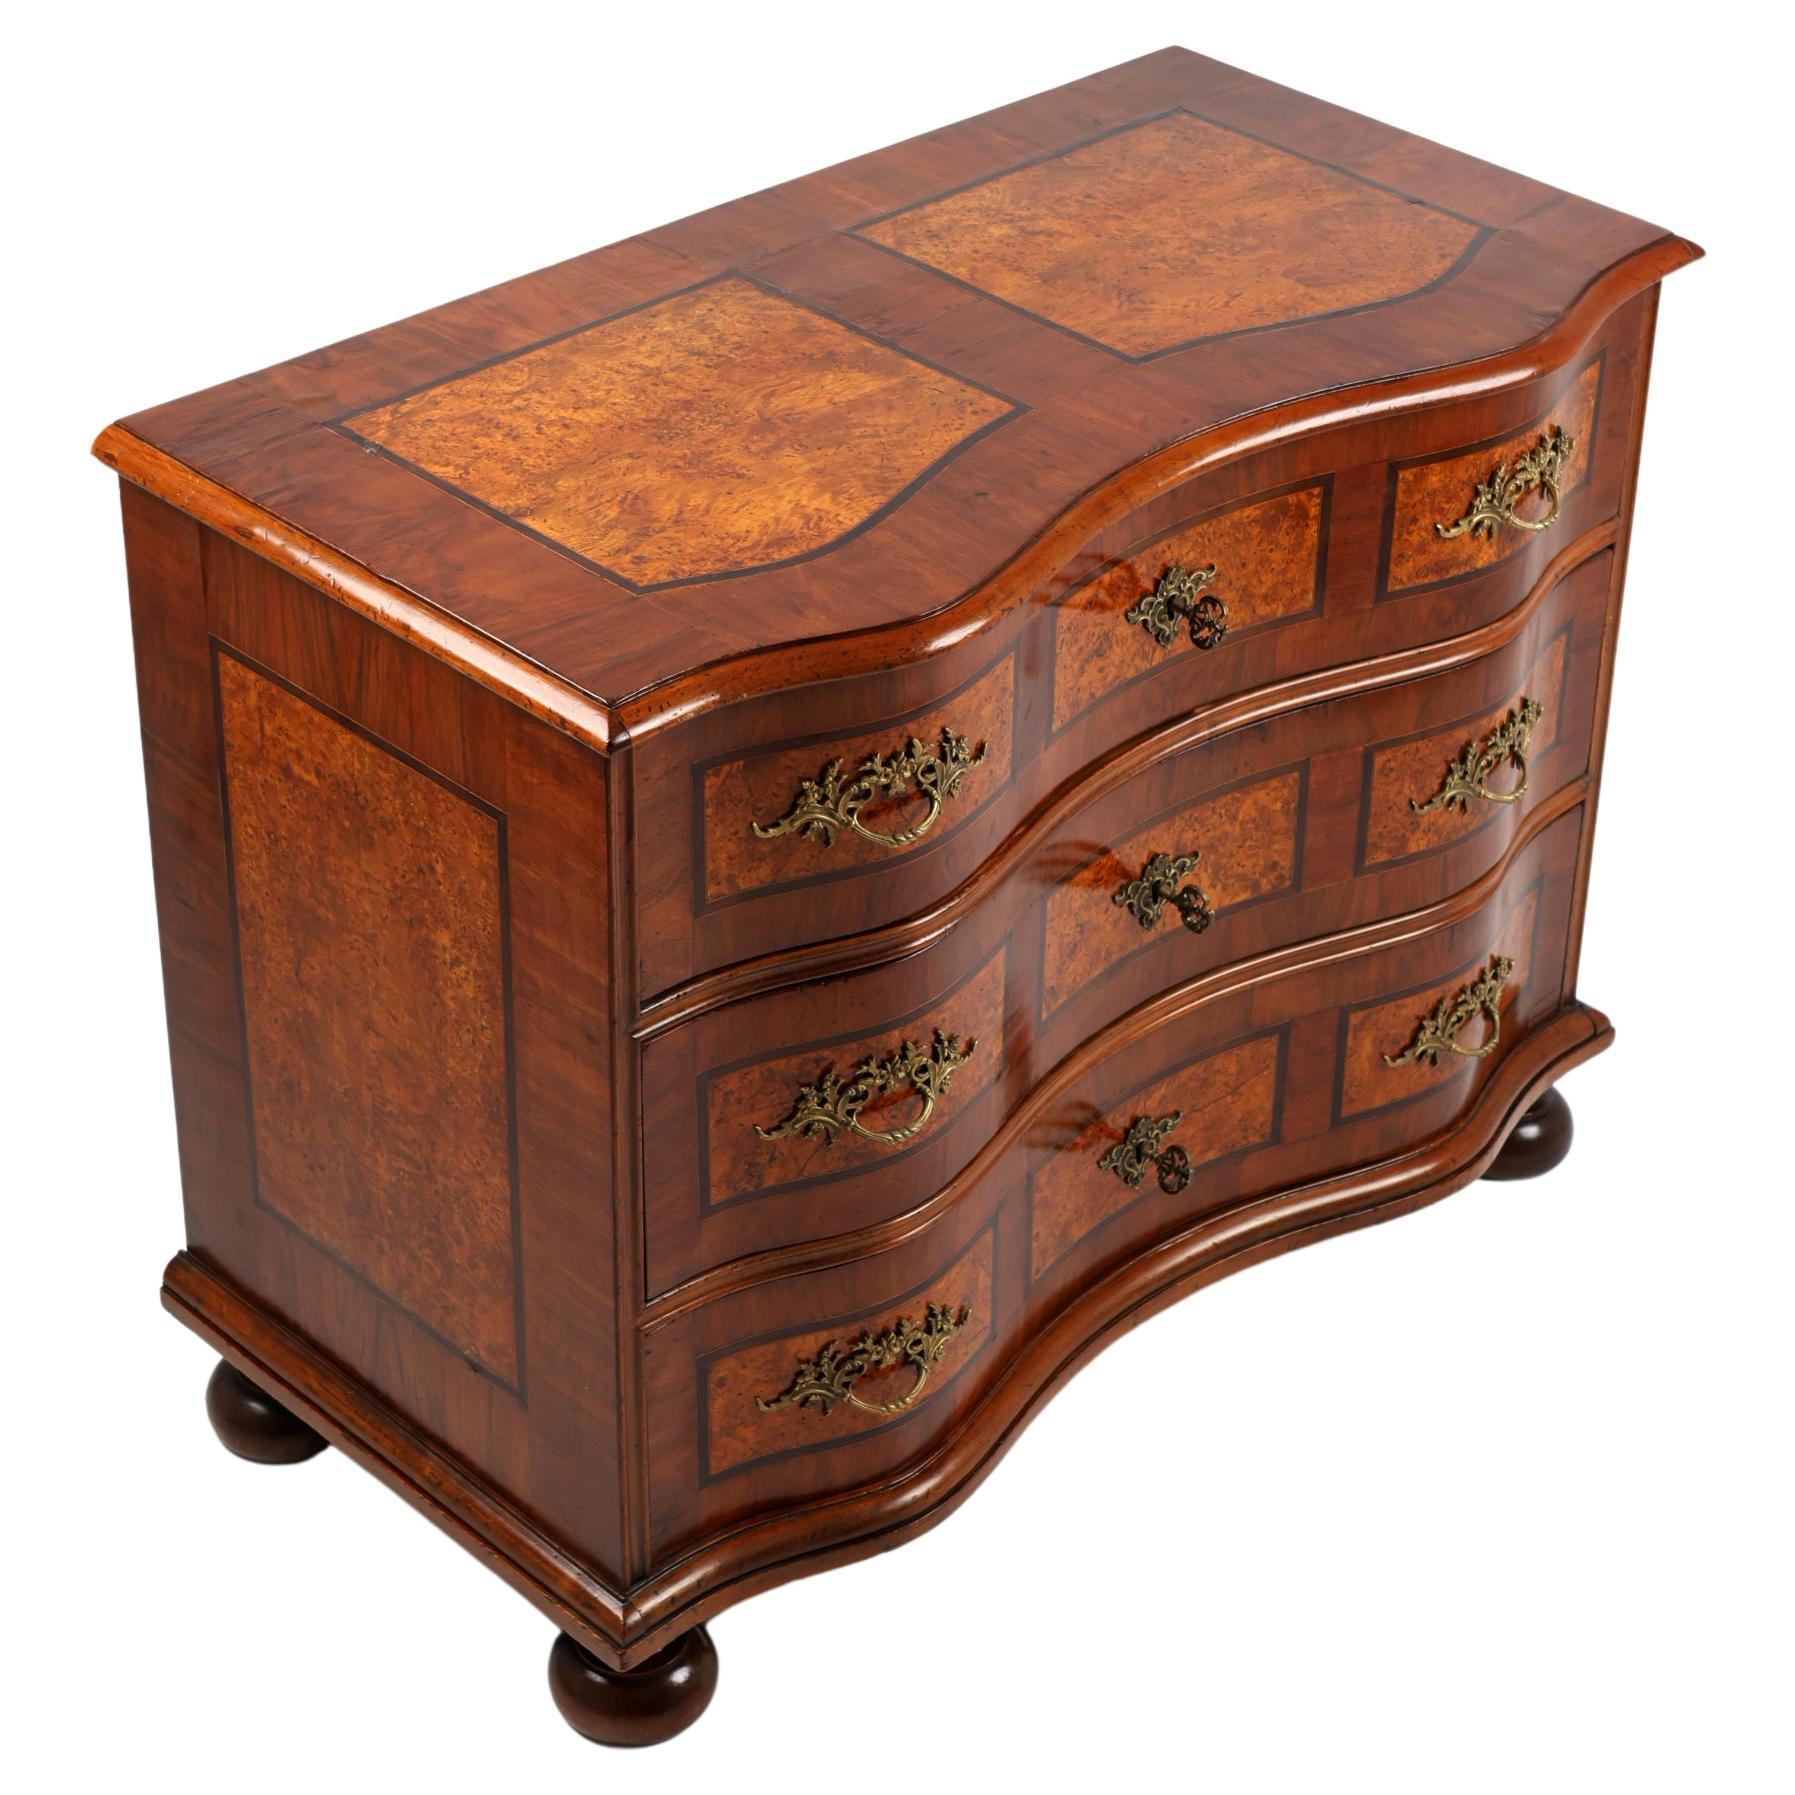 Late XIX Century Chest of Drawers in Baroque Style,
Germany, 1890
Walnut with burl wood,

A chest of drawers standing on spherical legs and in a beautiful form with a wavy front. Pine body, veneered with walnut. The furniture is decorated with